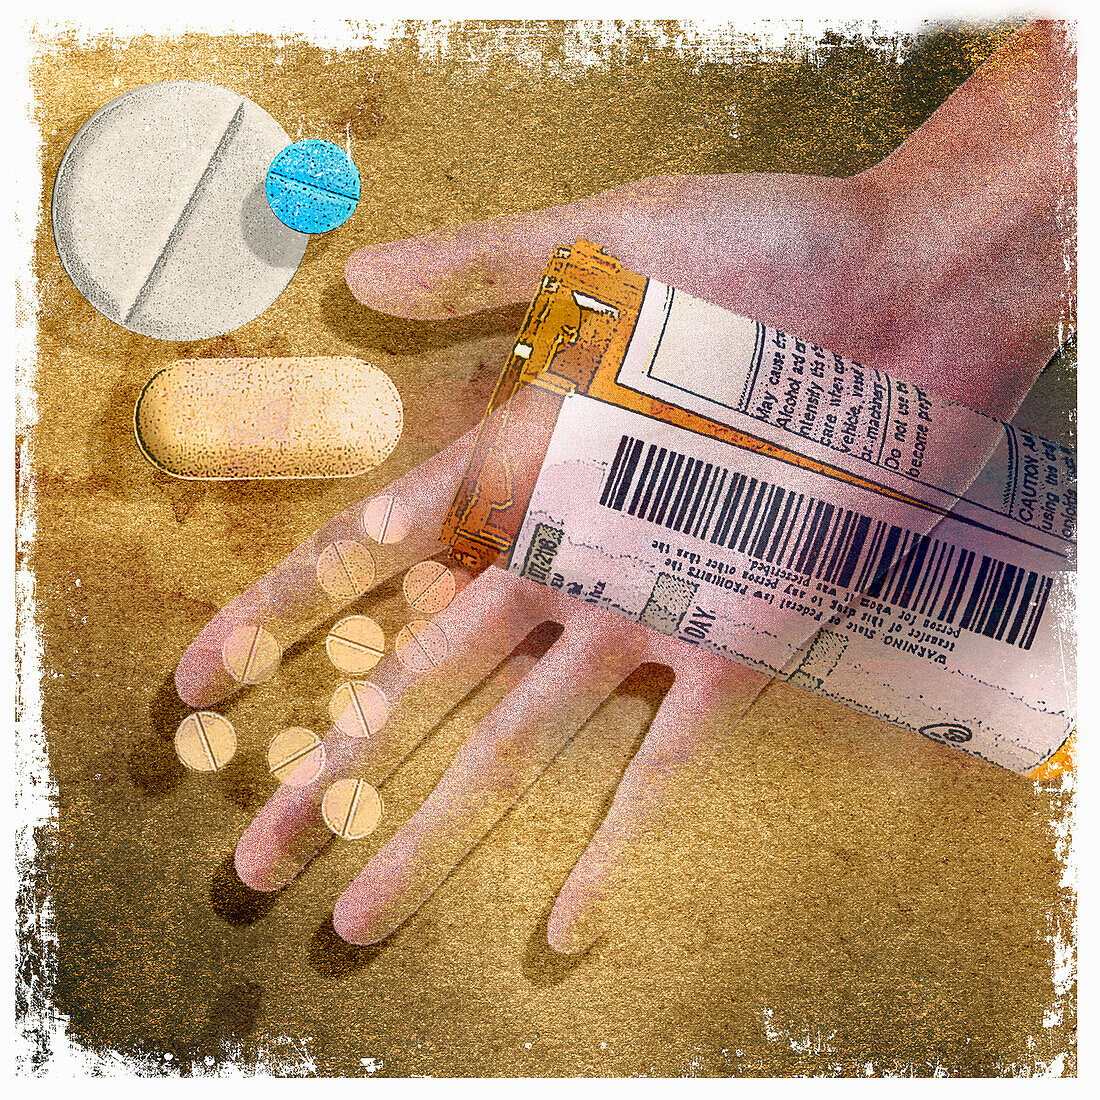 Pills tipping from pill bottle into hand, illustration